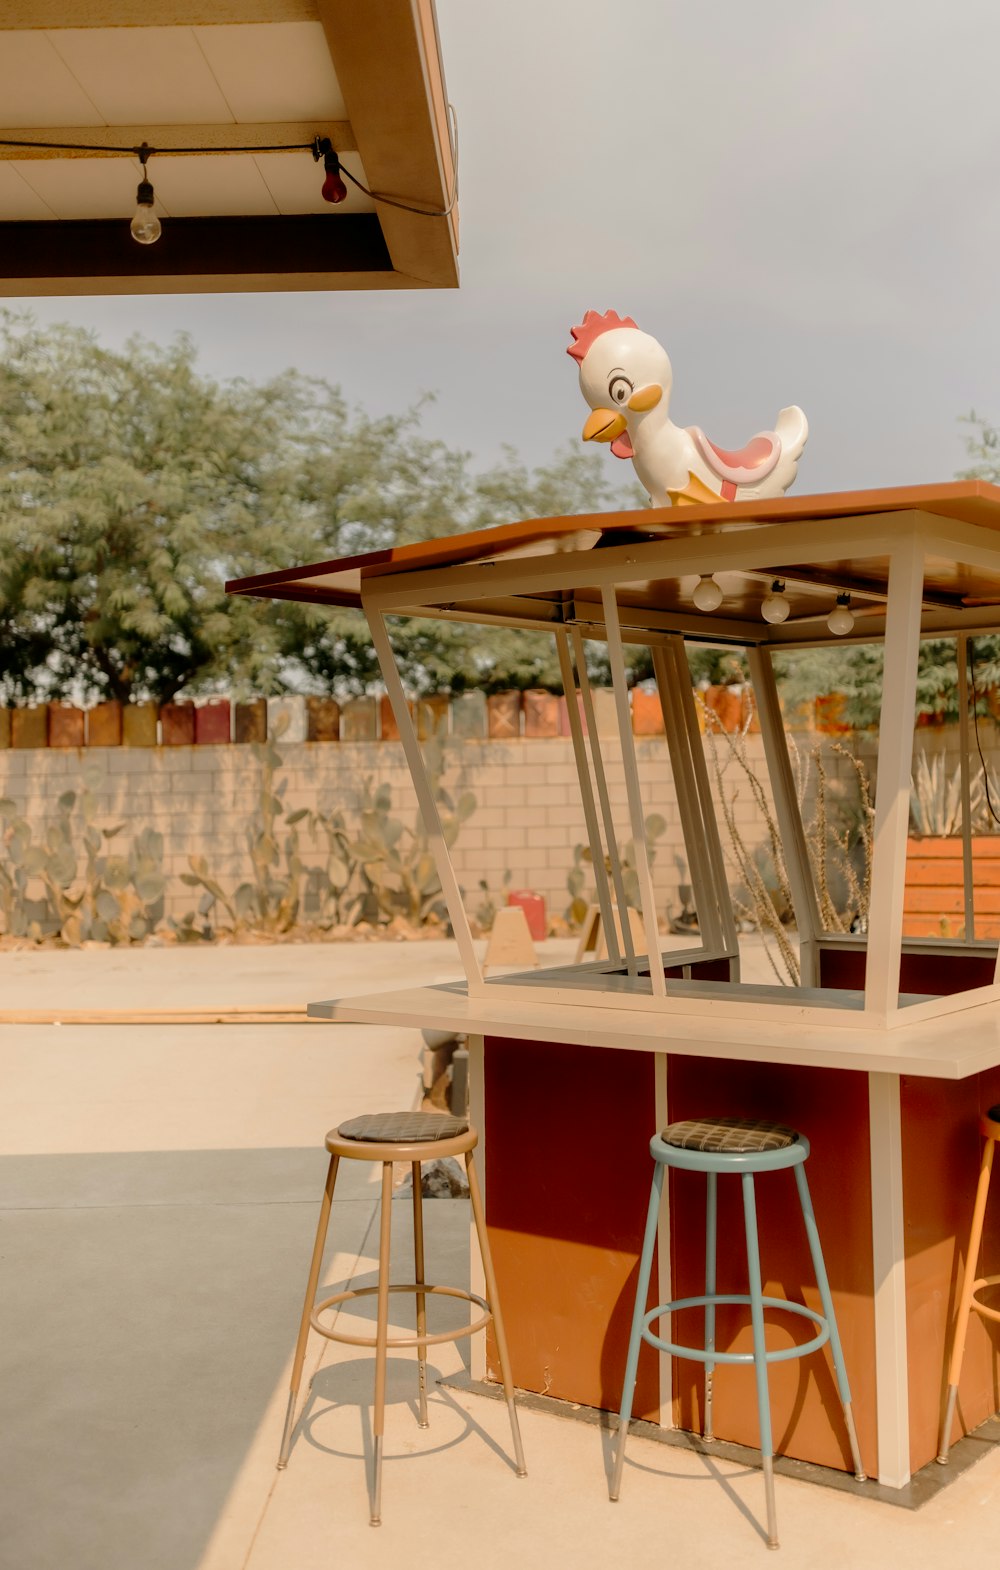 a chicken sitting on top of a bar next to two stools